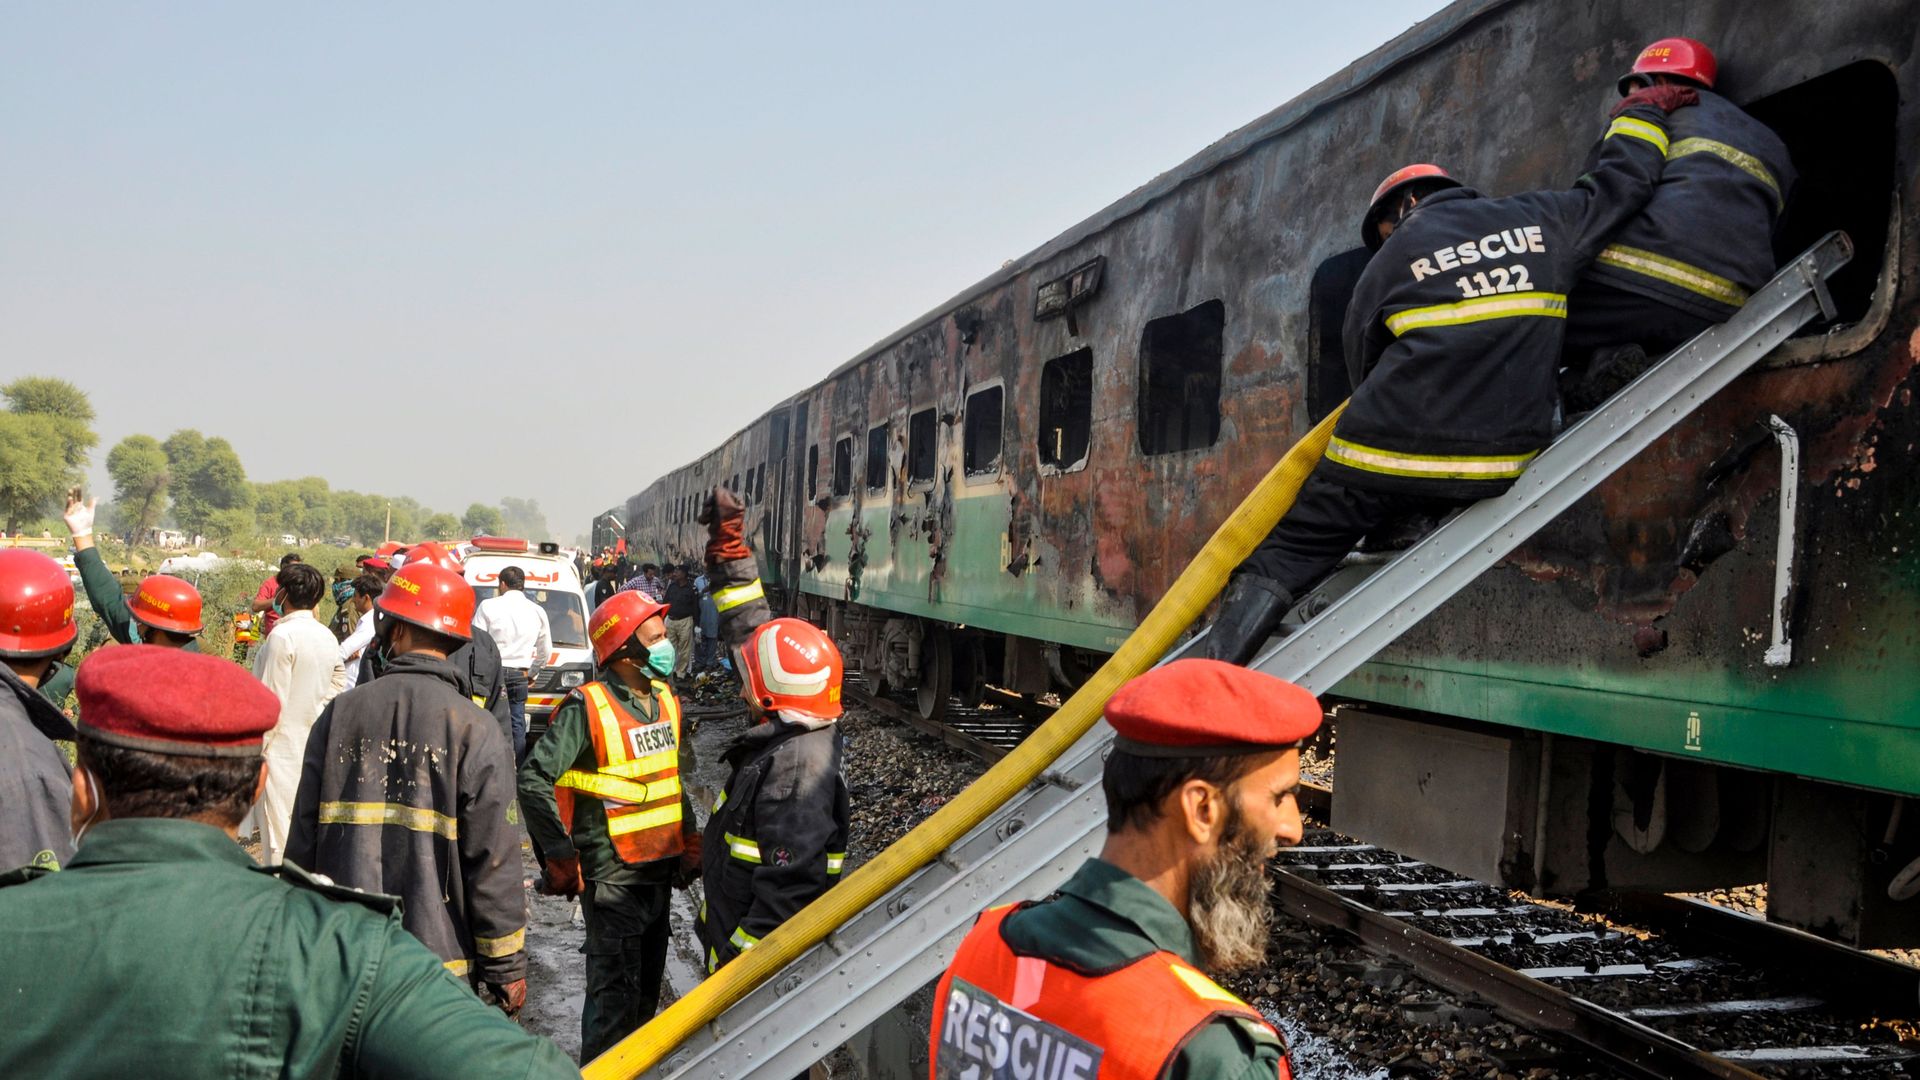 Firefighters work to cool down the burnt-out train carriages.